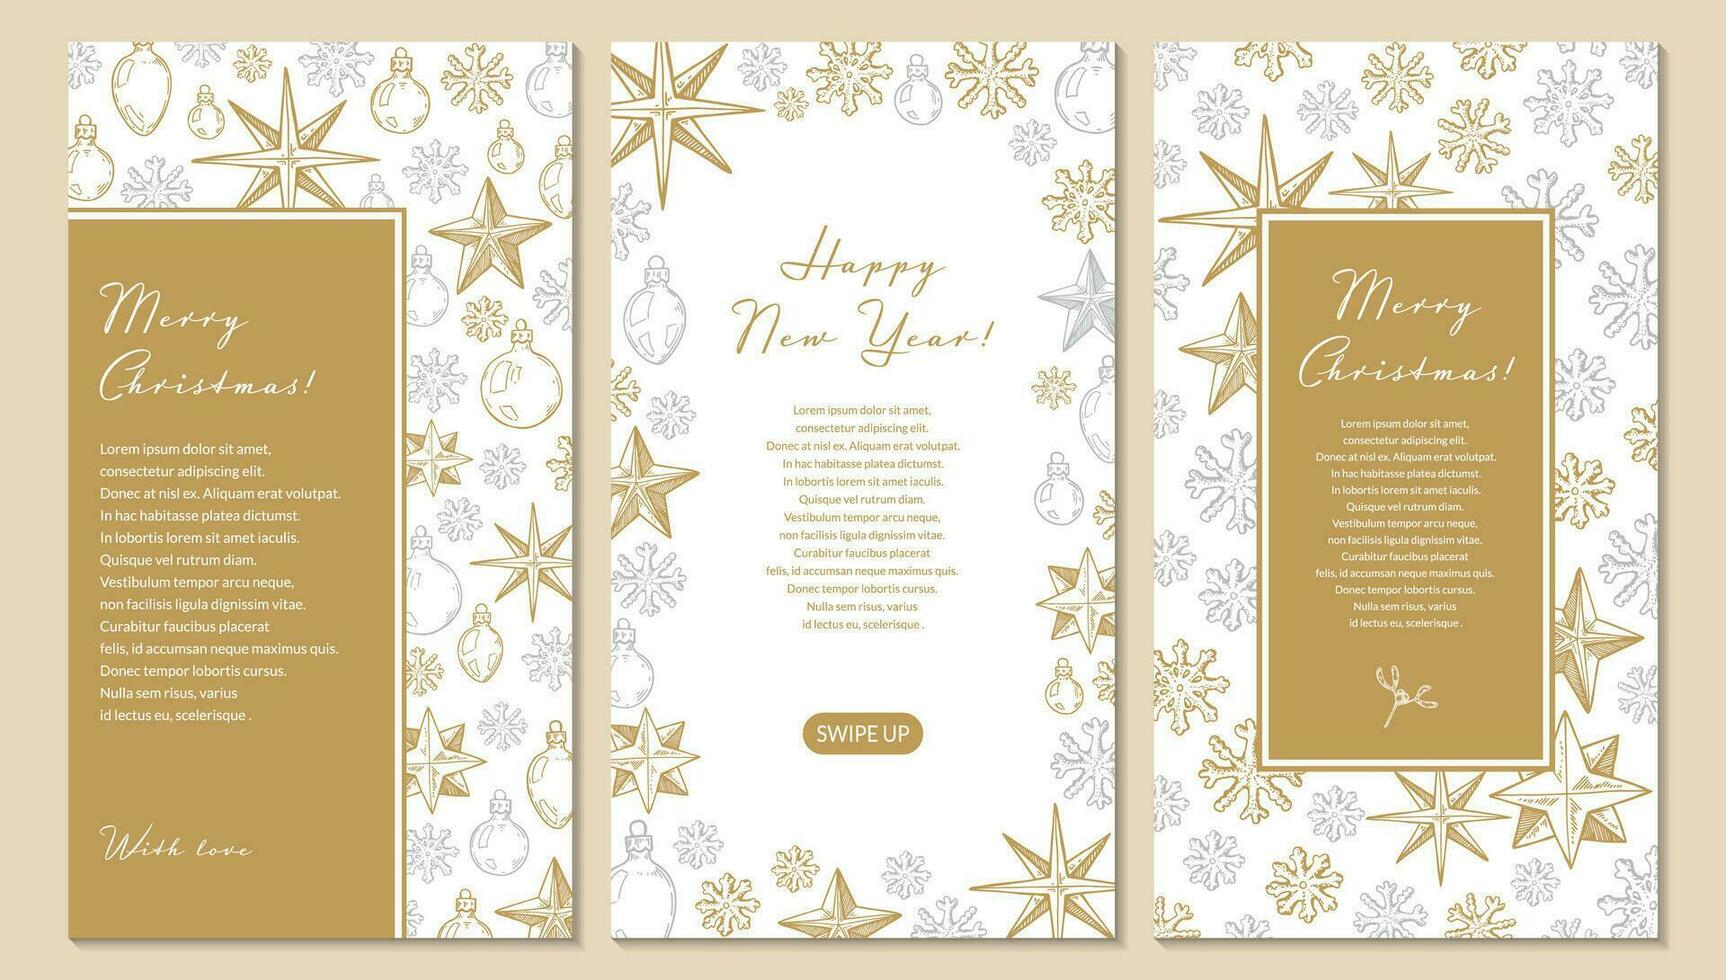 Set of Merry Christmas and Happy New Year vertical greeting cards with hand drawn golden five pointed stars and snowflakes. Vector illustration in sketch style. Social media stories template